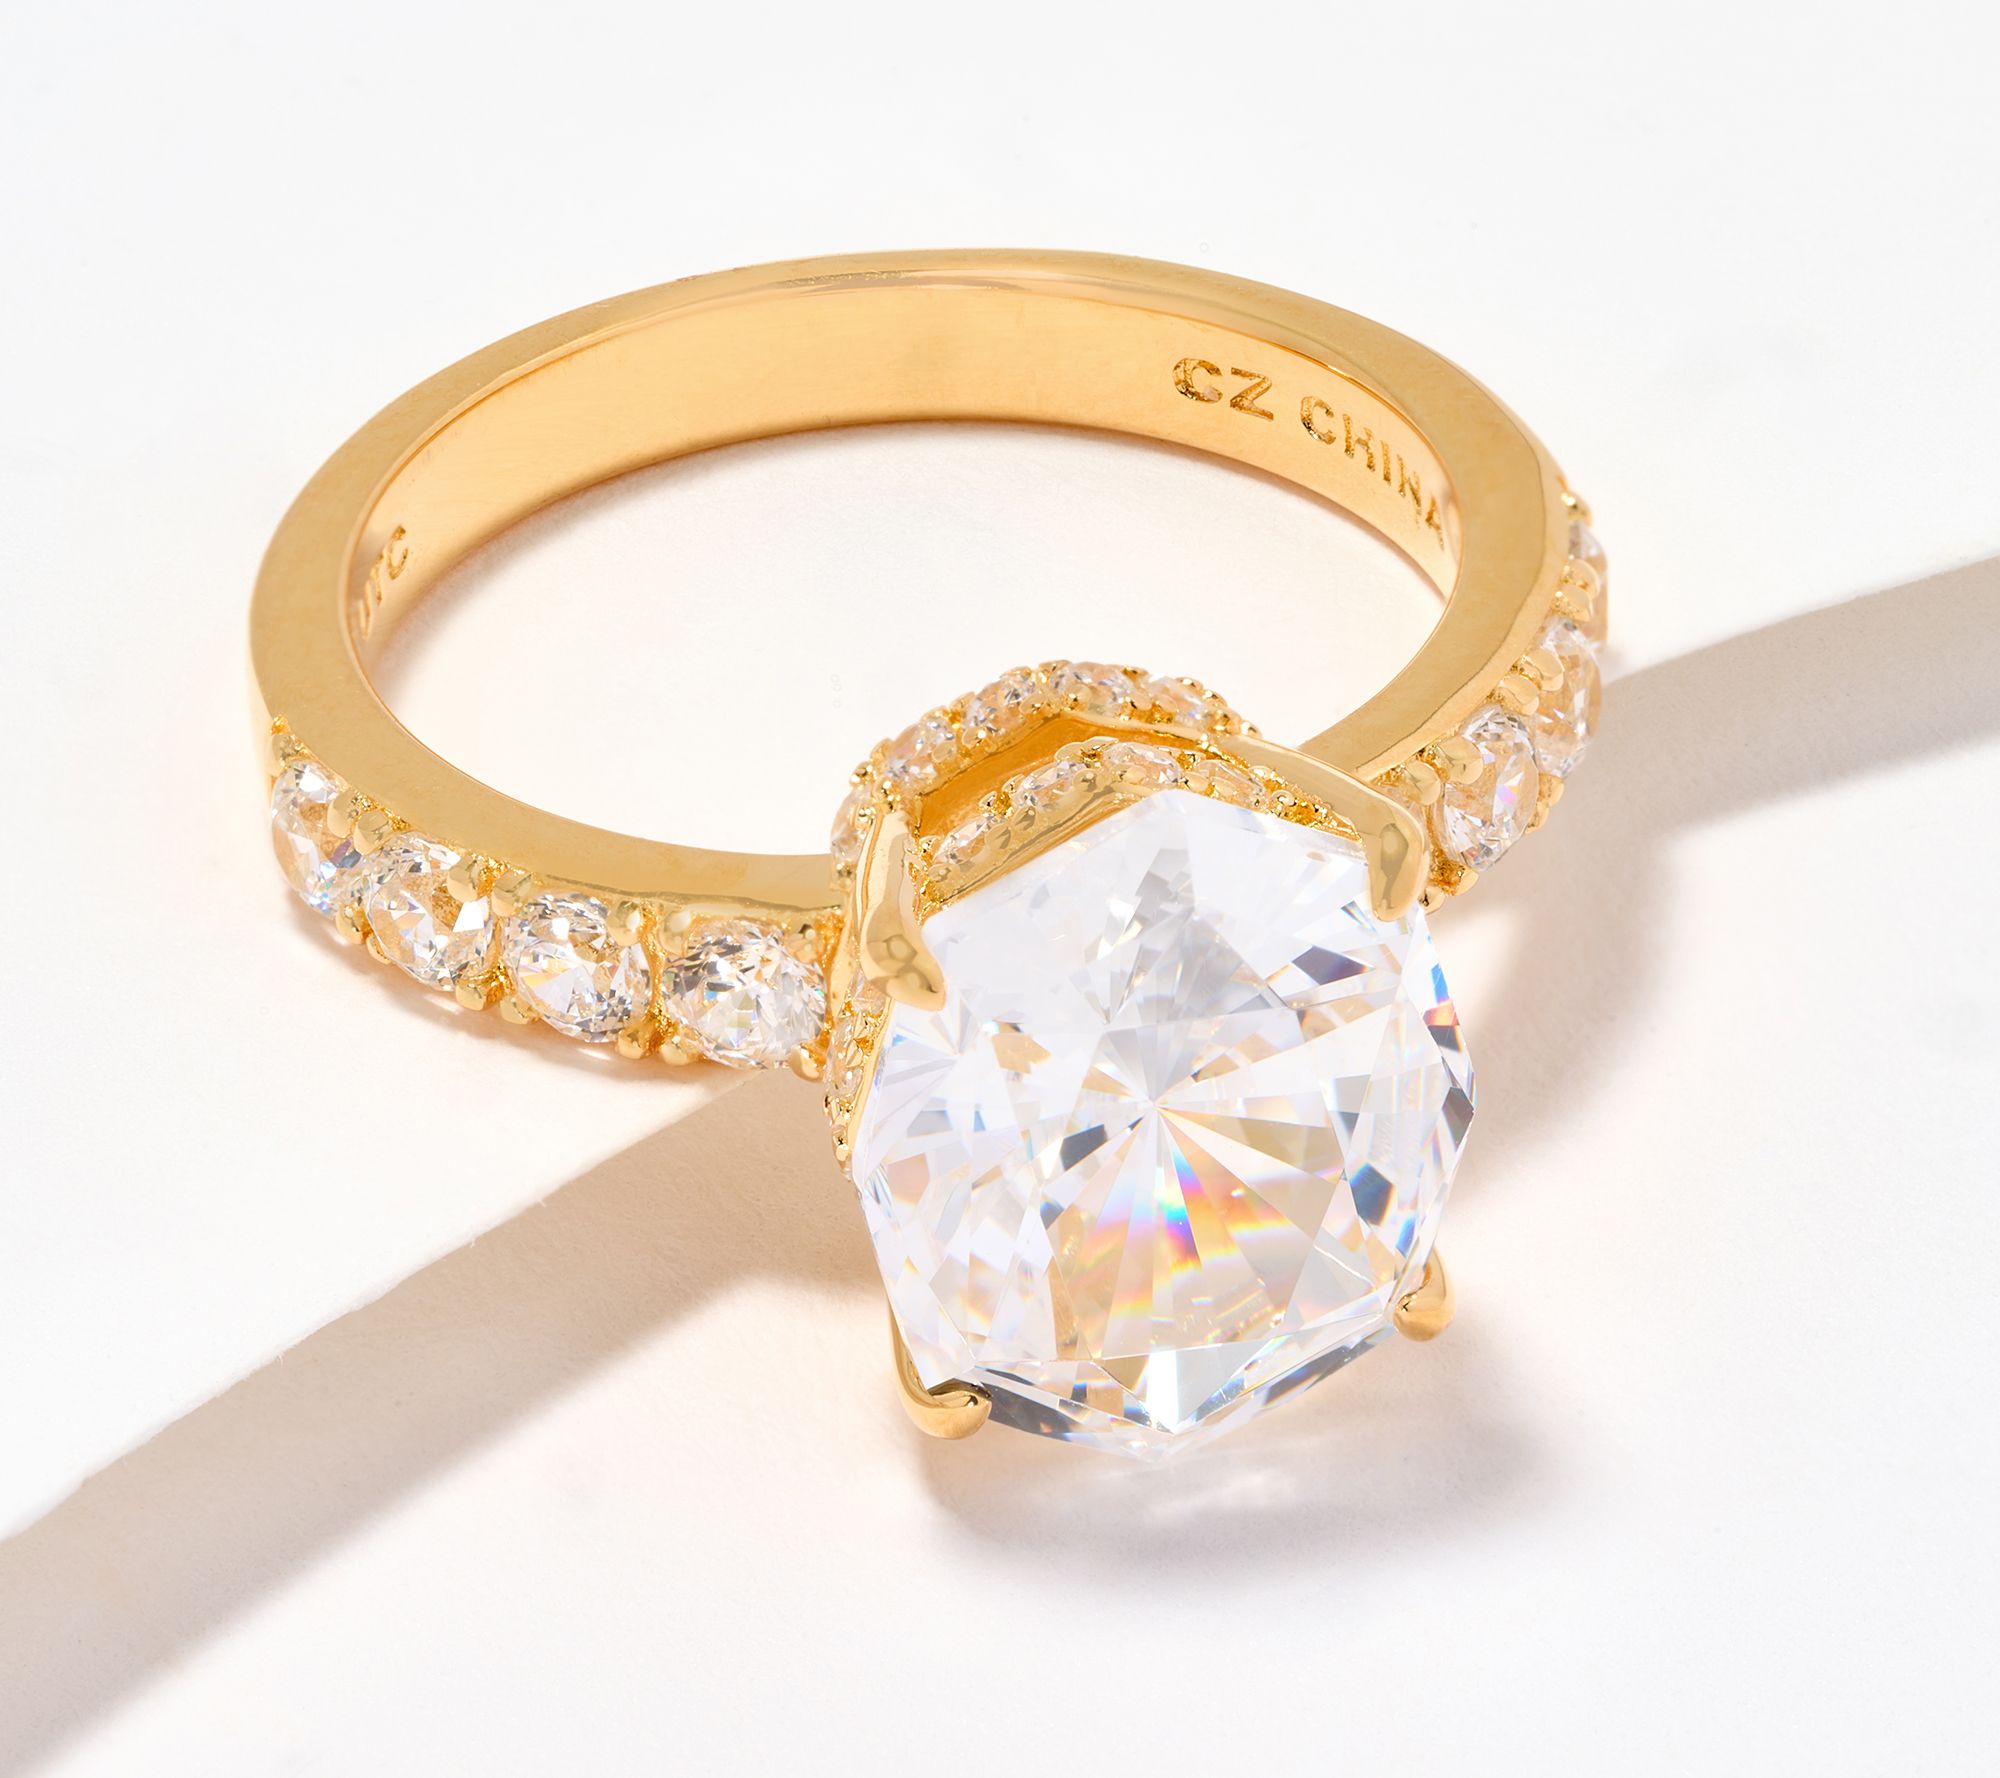 Graff's Signature Yellow Diamonds Shine Brilliantly in Its Latest High  Jewelry Collection